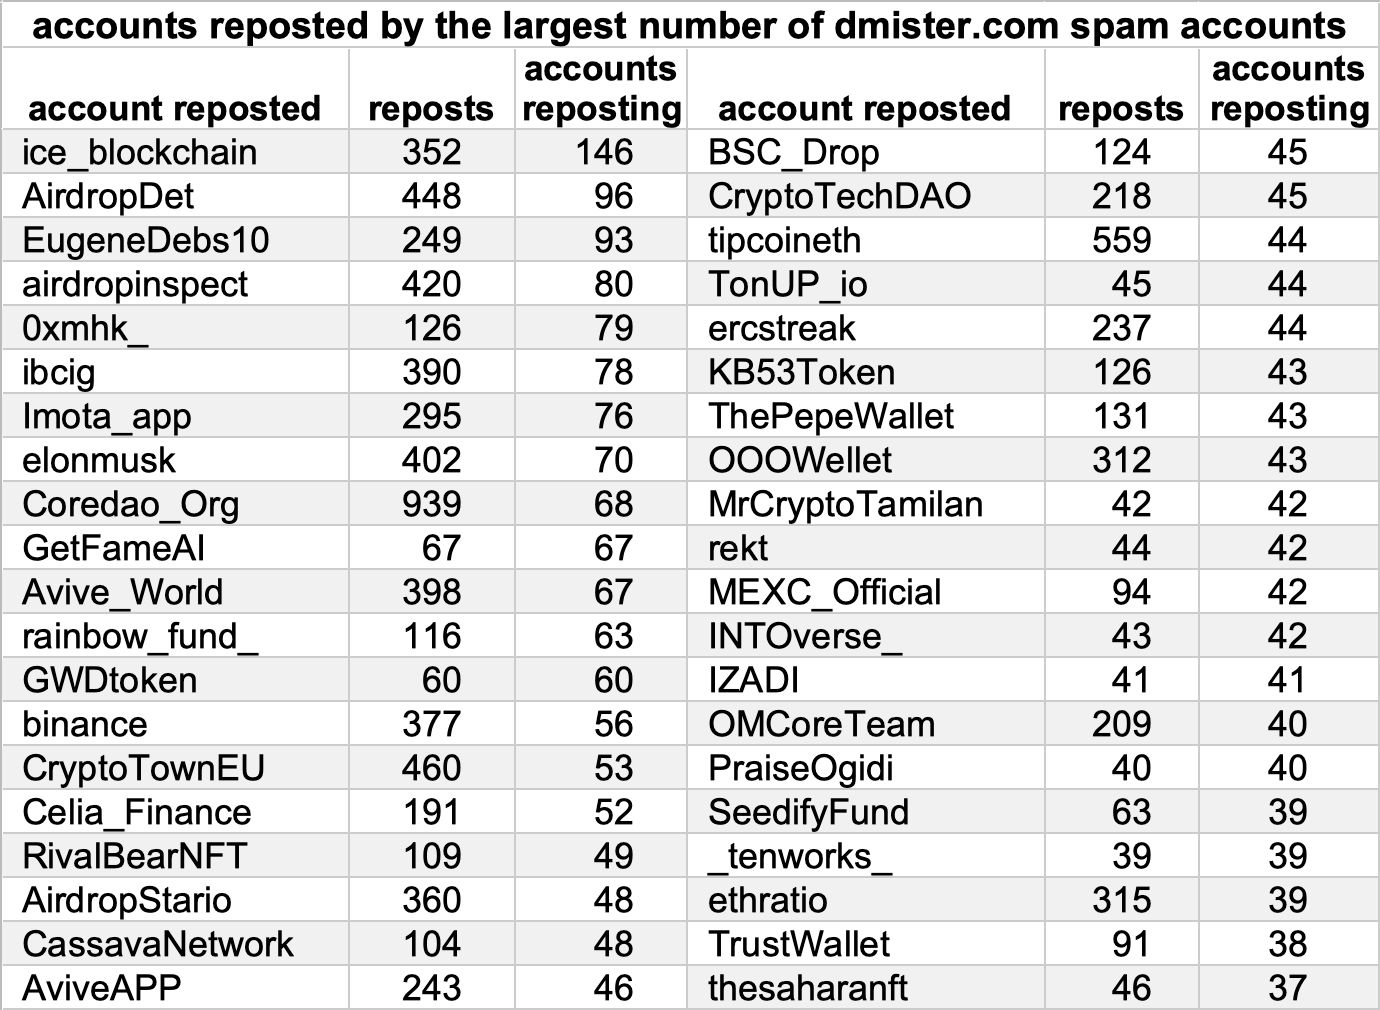 table of accounts reposted/retweeted by the spam accounts